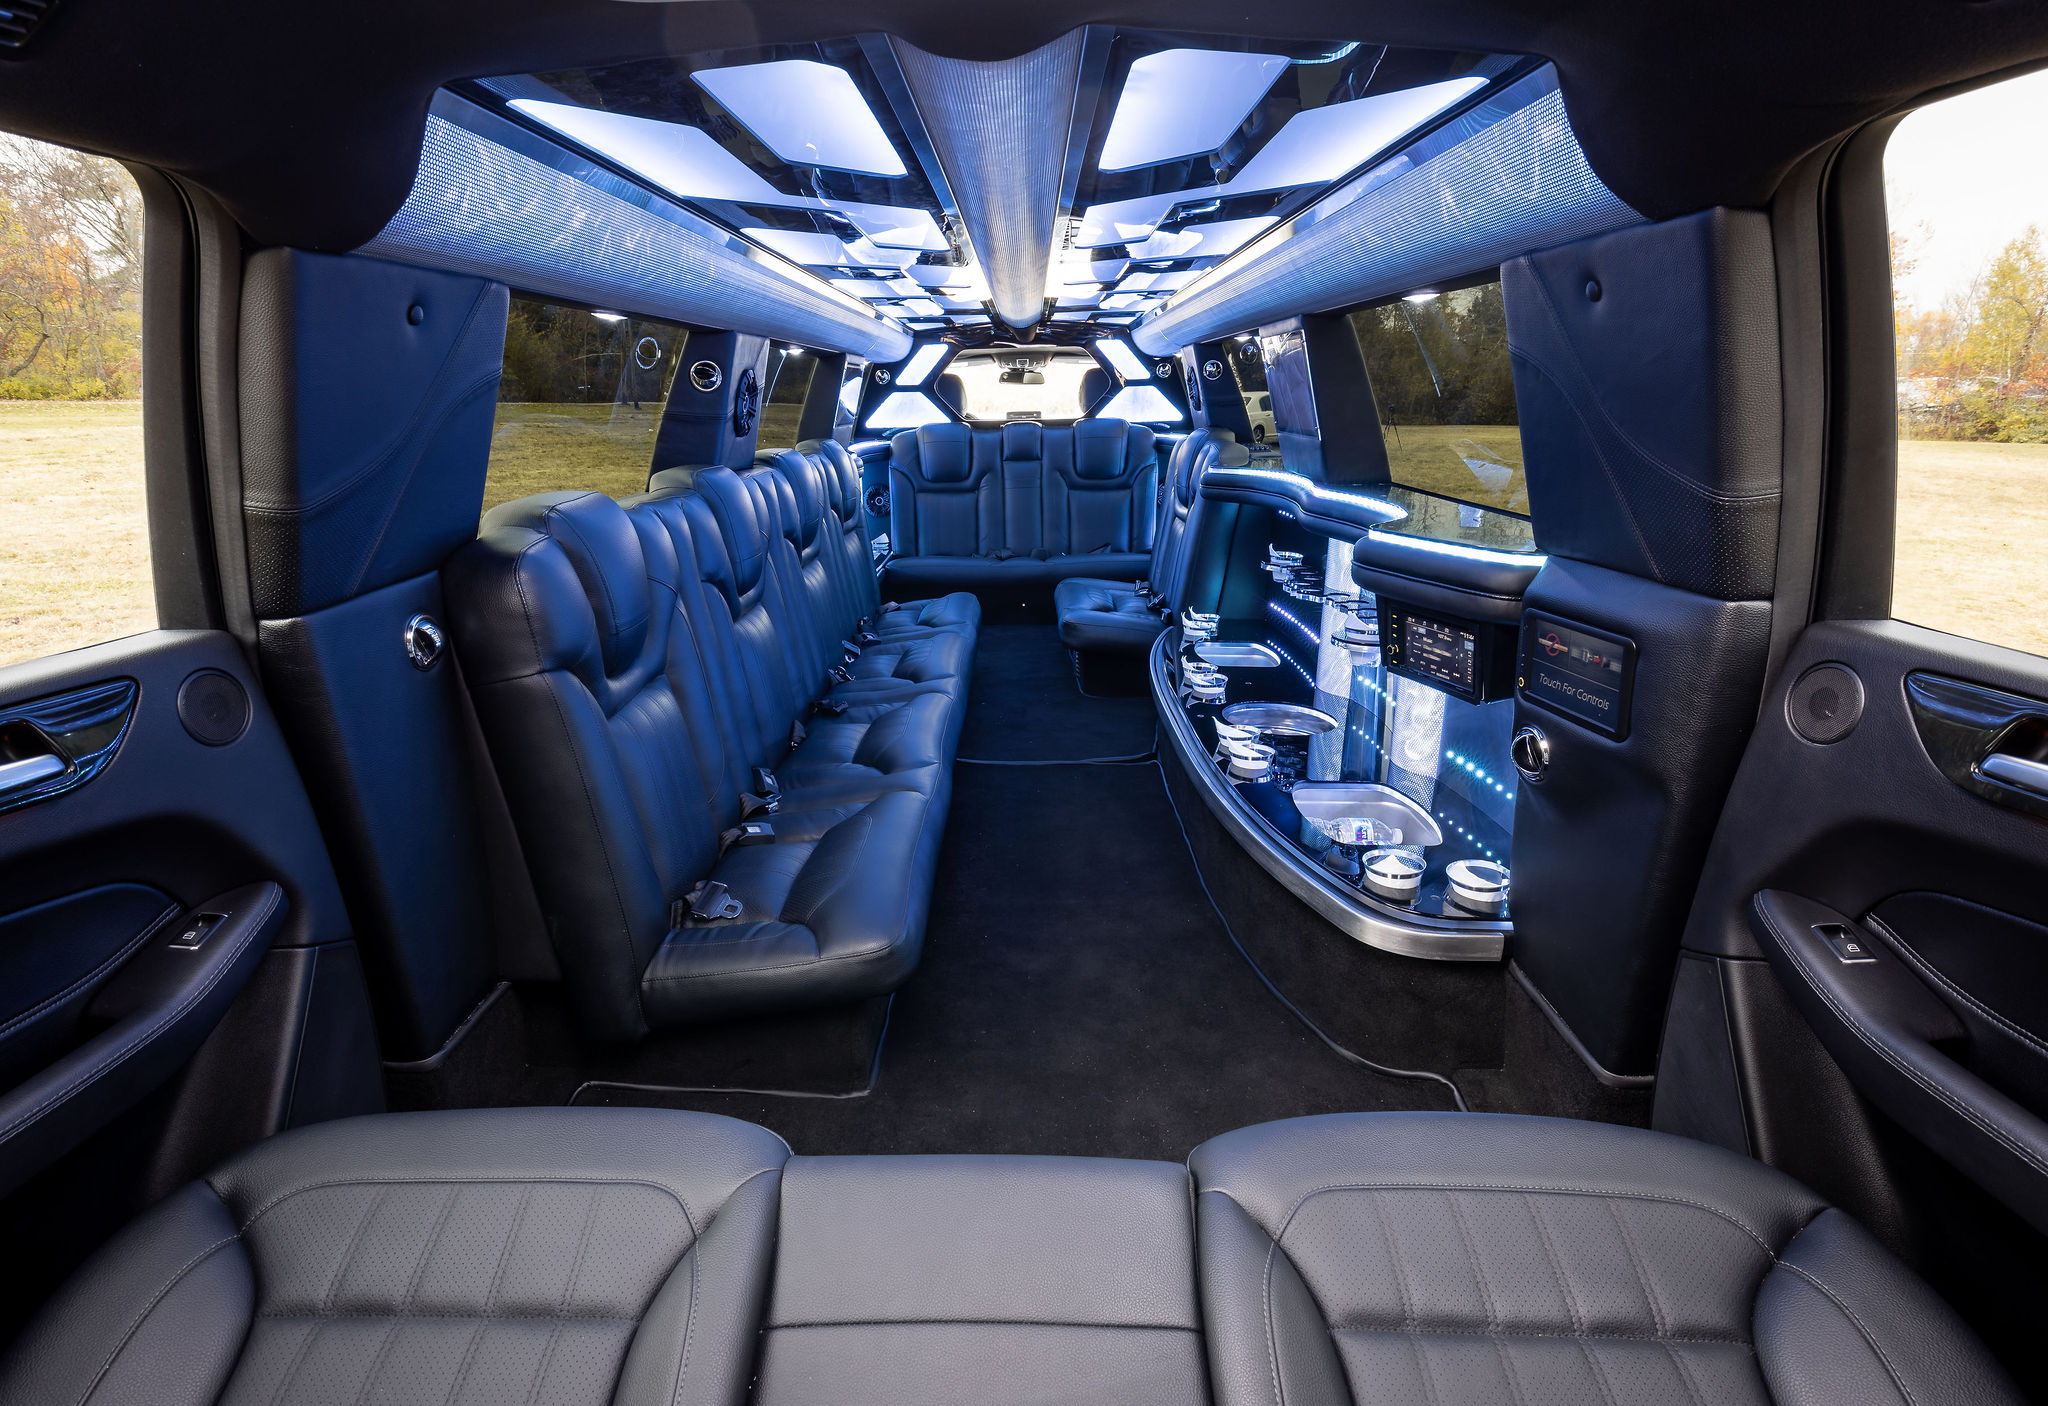 How Many Seats Does a Mercedes Limo Have?